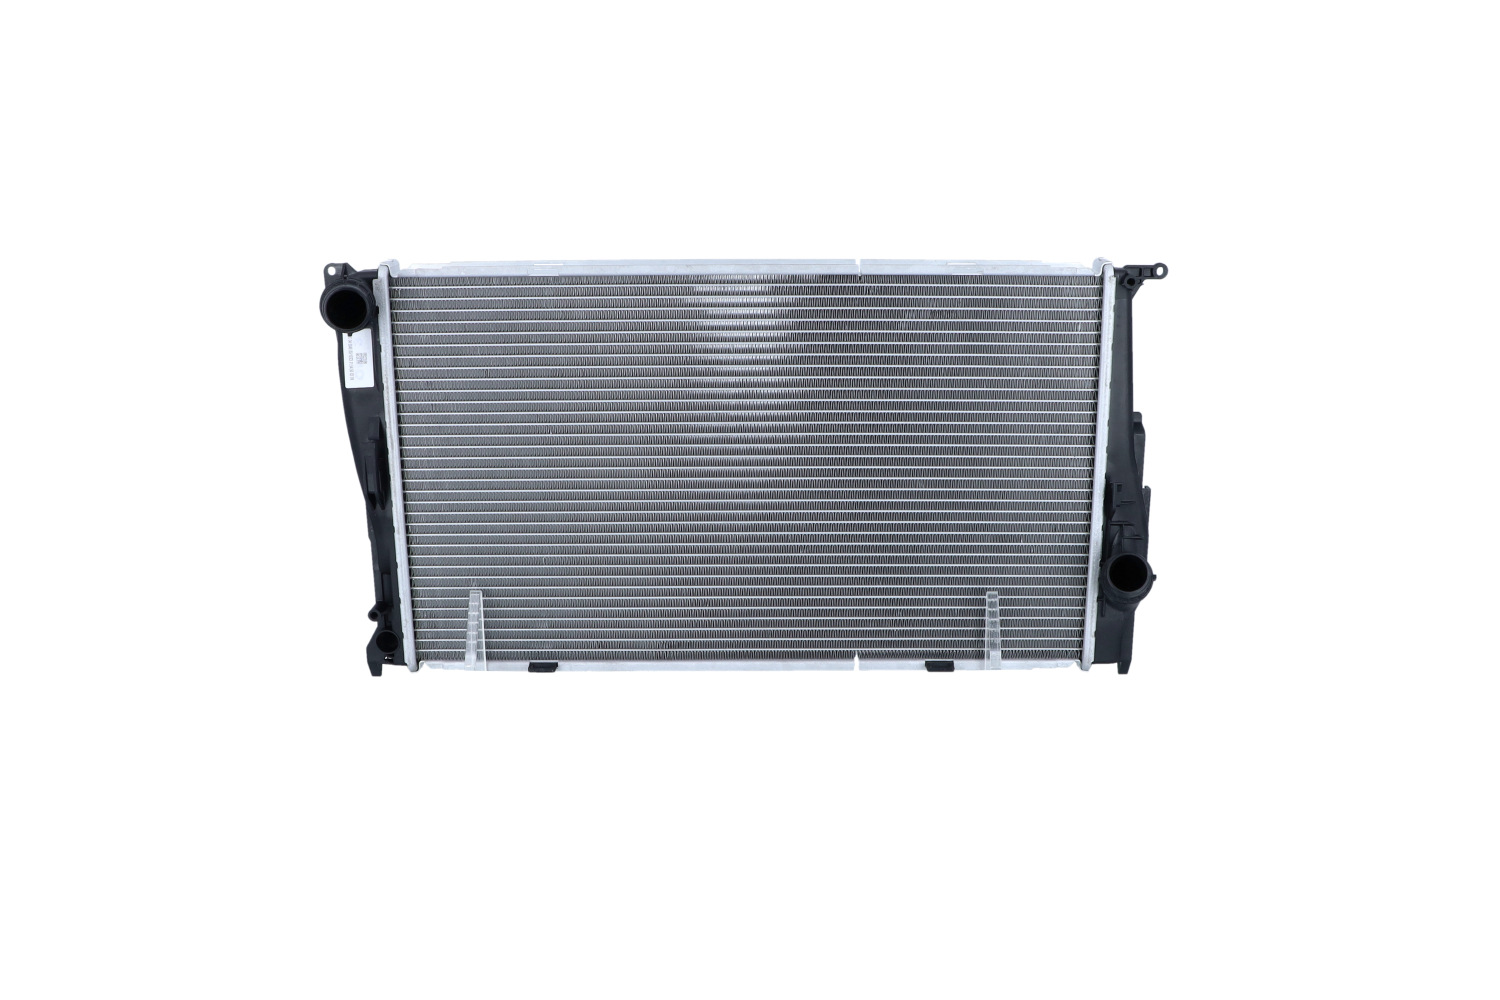 NRF EASY FIT 53472 Engine radiator Aluminium, 600 x 345 x 33 mm, with mounting parts, Brazed cooling fins